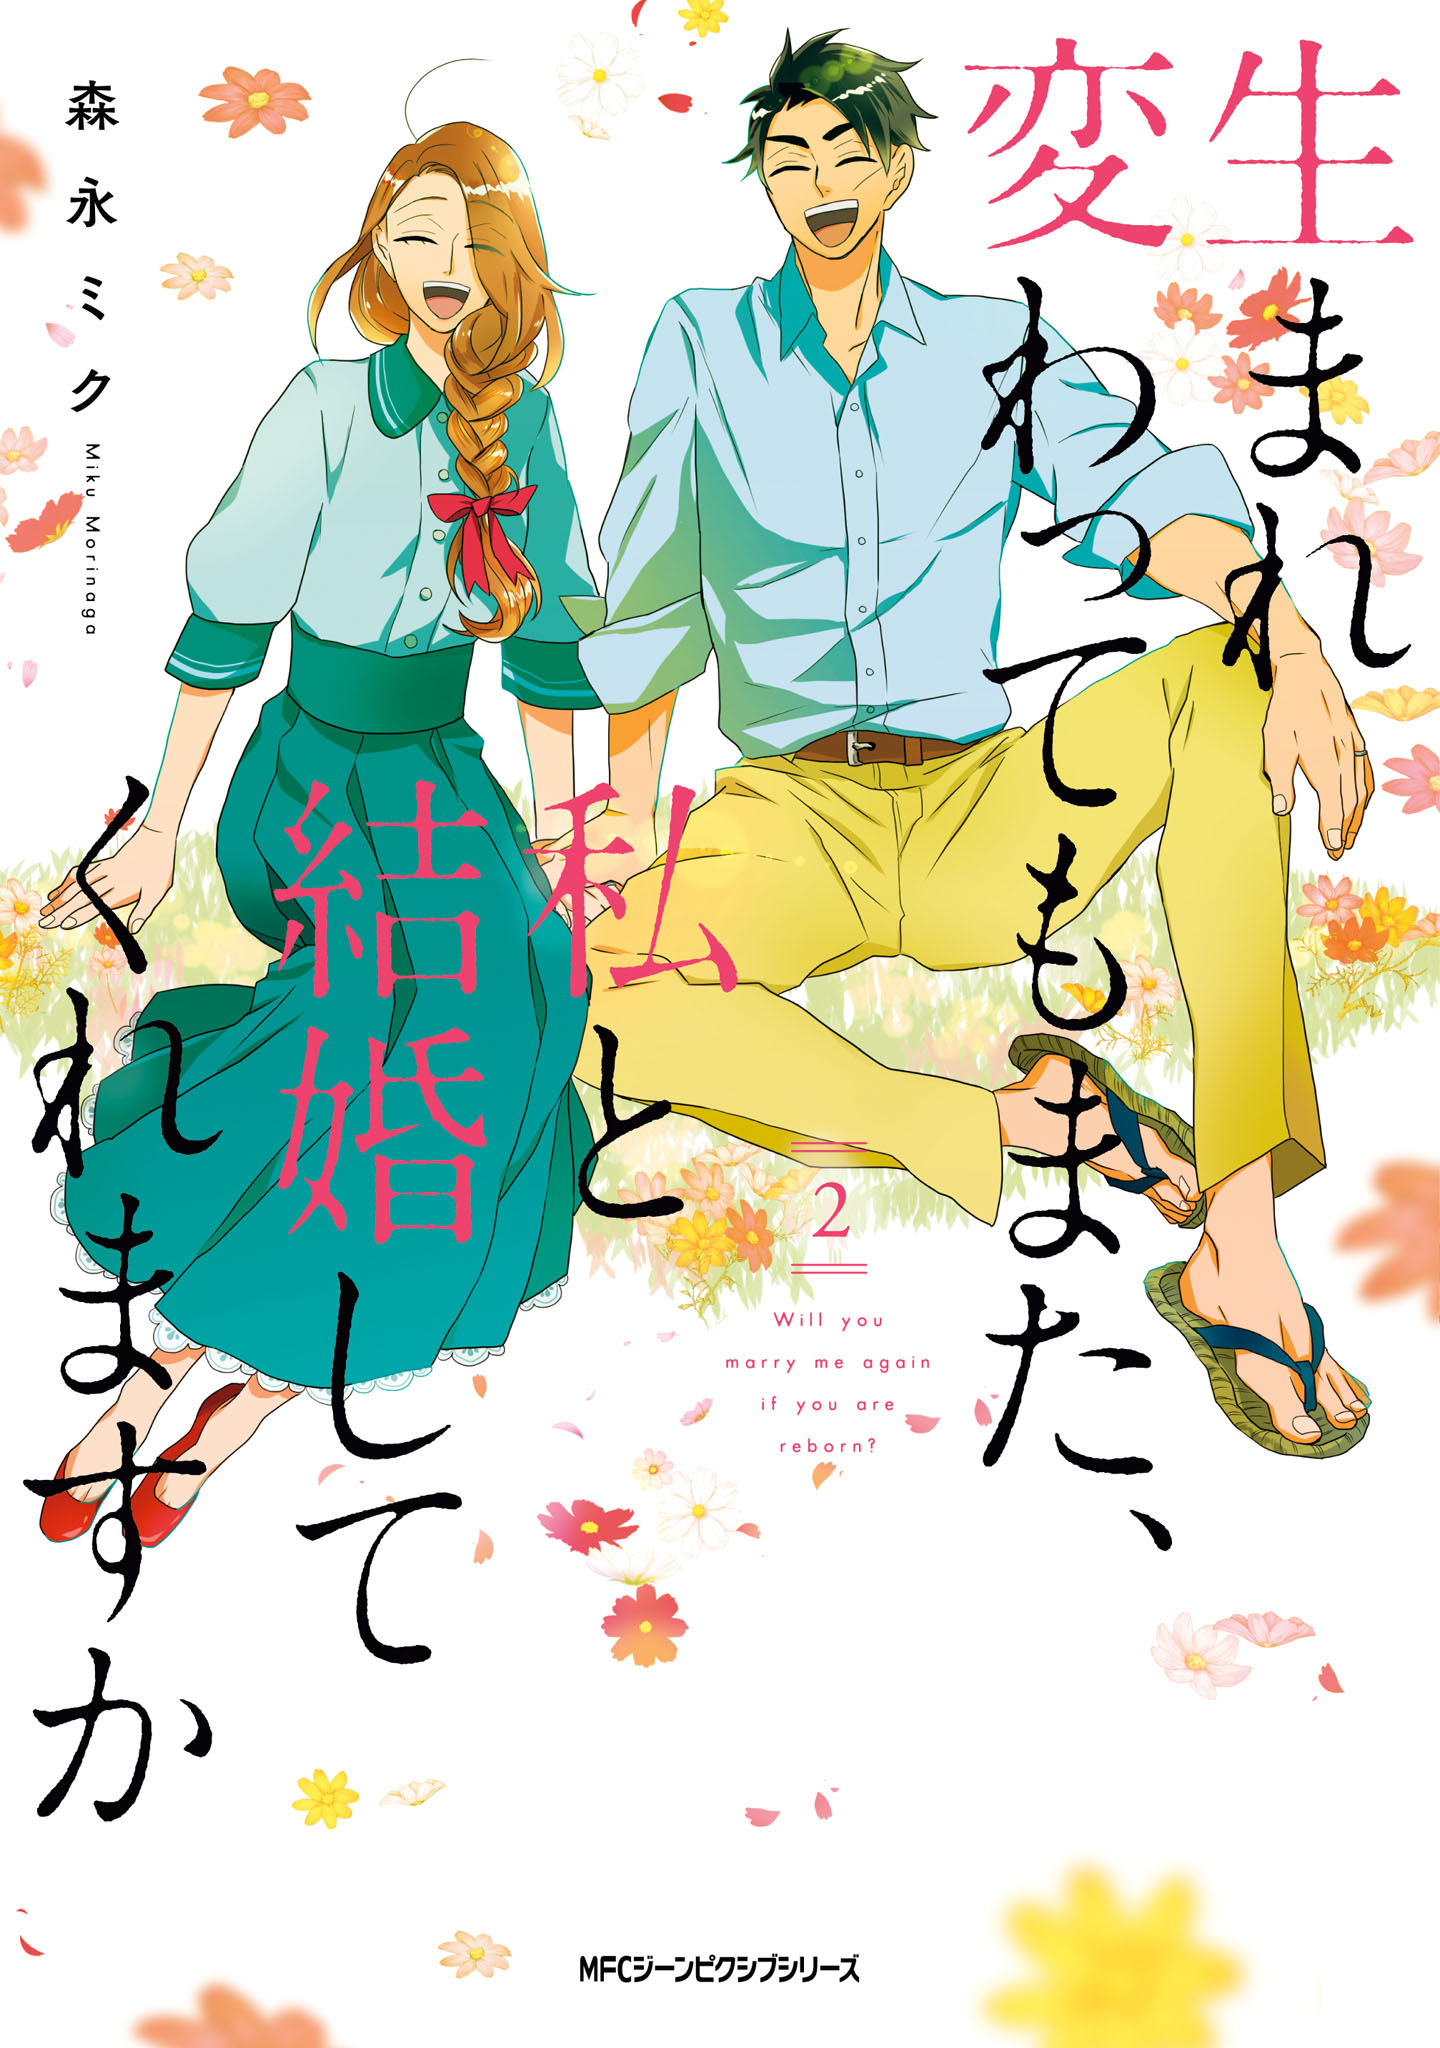 Will You Marry Me Again If You Are Reborn? Vol.2 Chapter 11.5: Extras - Picture 1